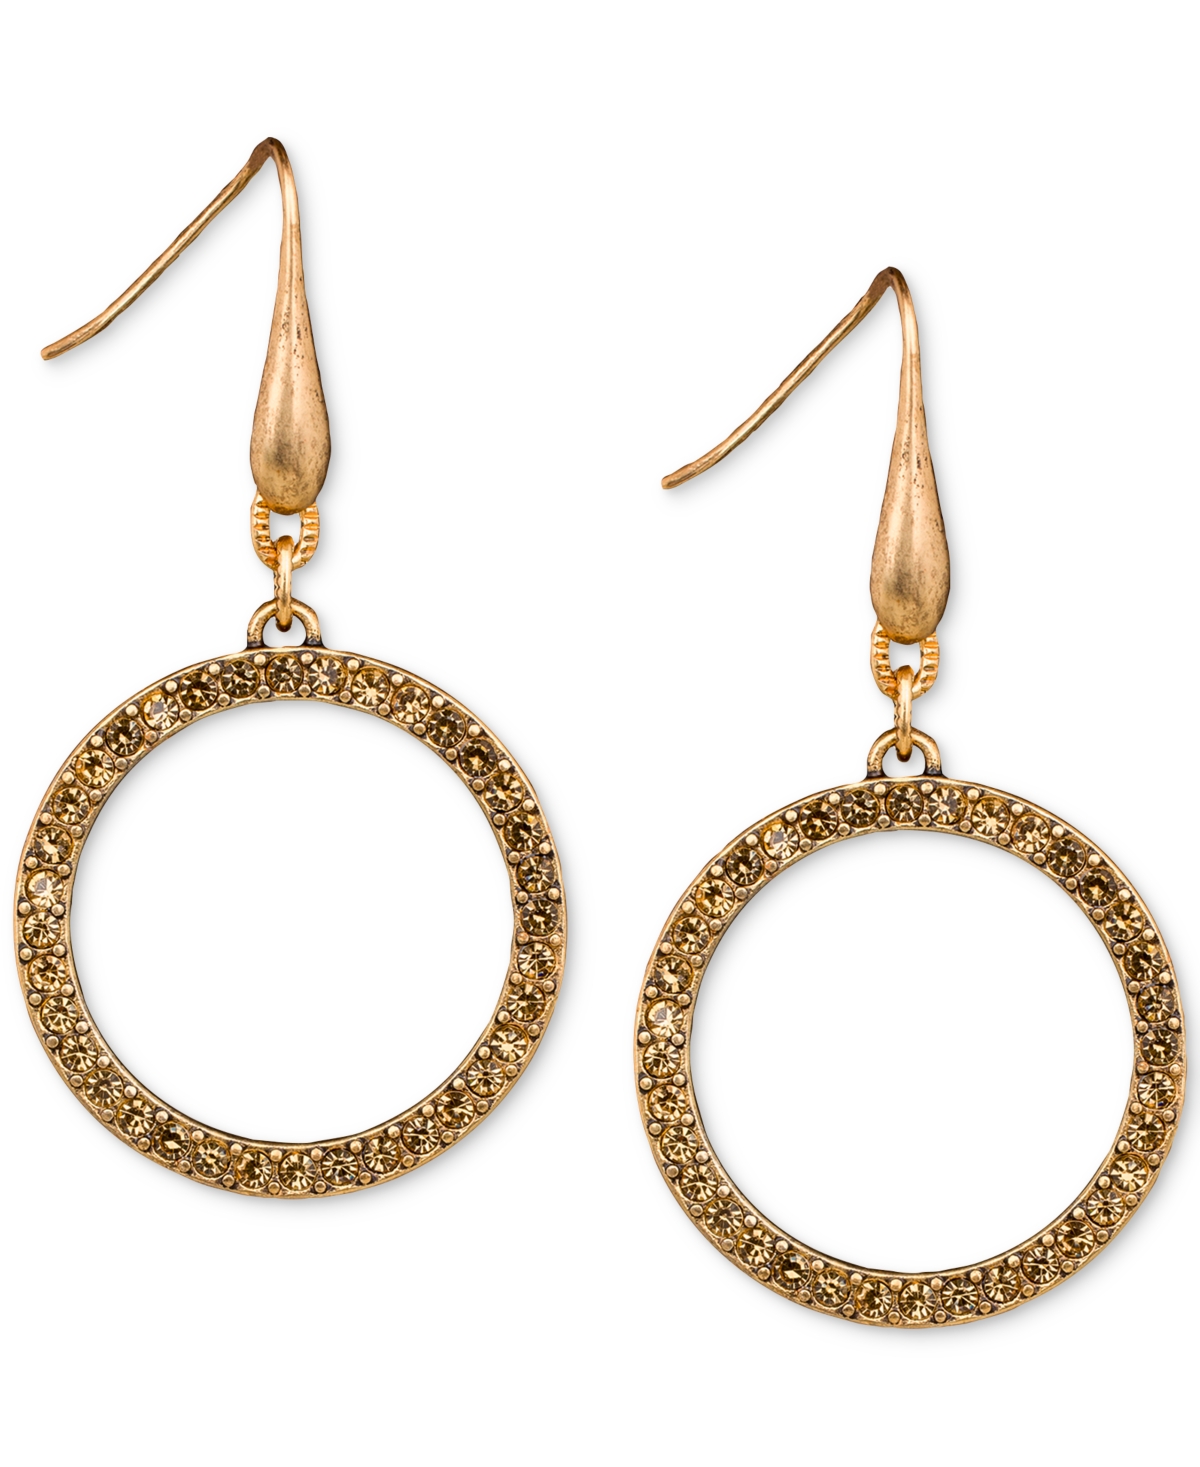 Pave Open Circle Drop Earrings - Antique Gold